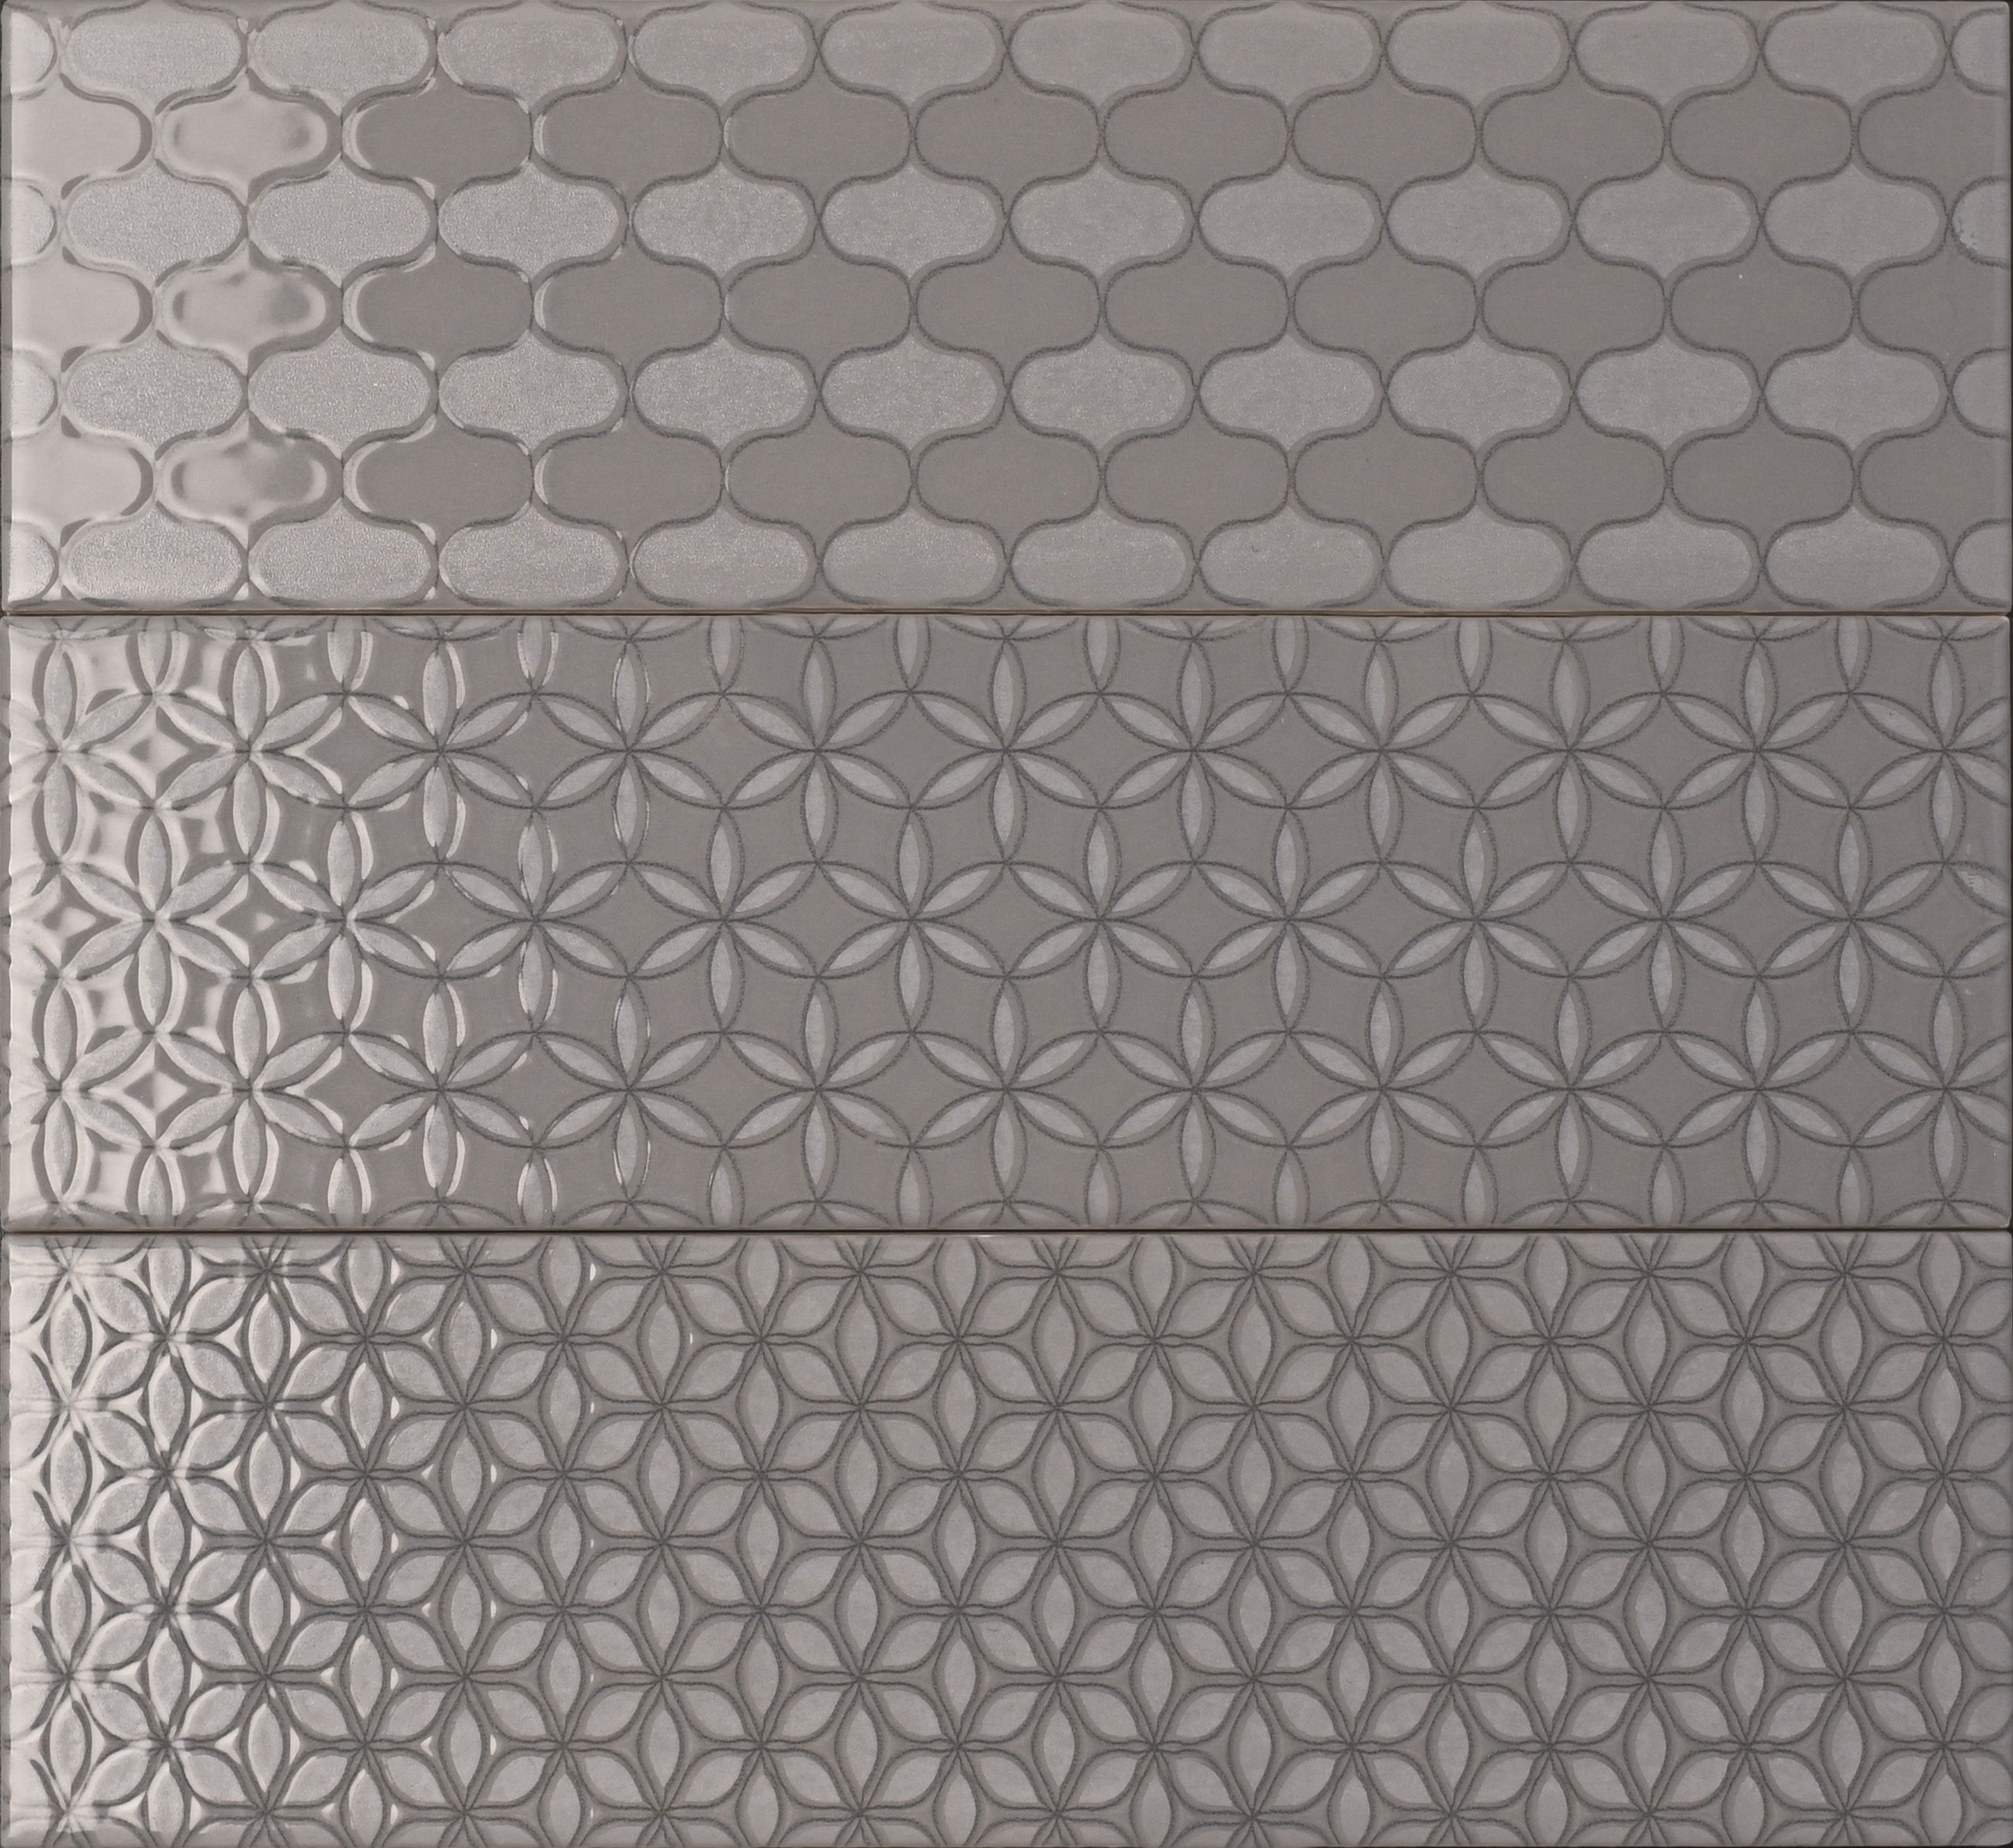 Johnson Tiles Tangier Grey Gloss Patterned Textured Ceramic Indoor Wall Tile, Pack of 54, (L)245mm (W)75mm